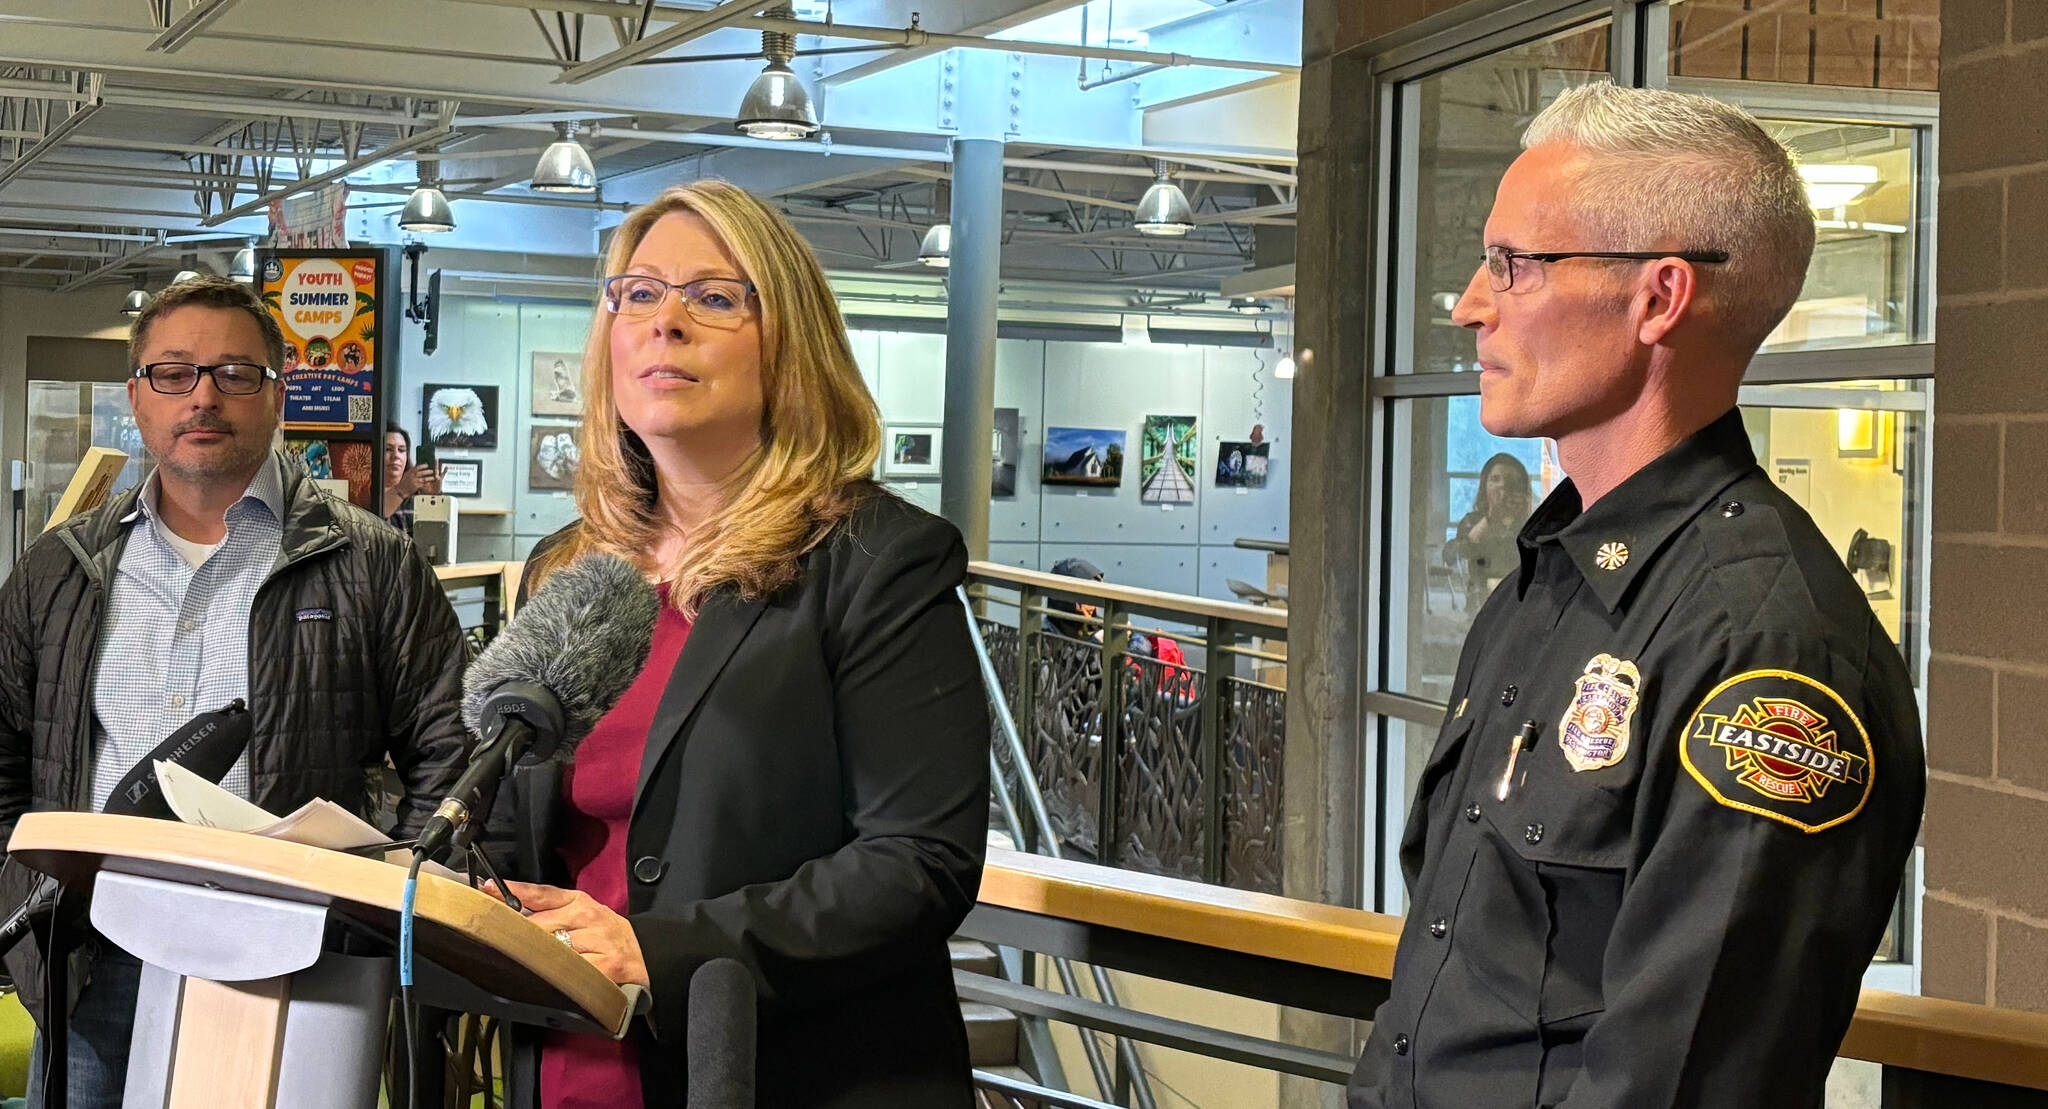 Mercer Island City Manager Jessi Bon addresses the media on April 4 regarding a leaking underground water pipe that posed a landslide risk to a section of the city on April 3. Joining her at the press conference — which occurred at the Mercer Island Community Event Center — are, at left, Seattle Public Utilities’ Wylie Harper, and at right, Eastside Fire & Rescue Chief Ben Lane. Andy Nystrom/ staff photo